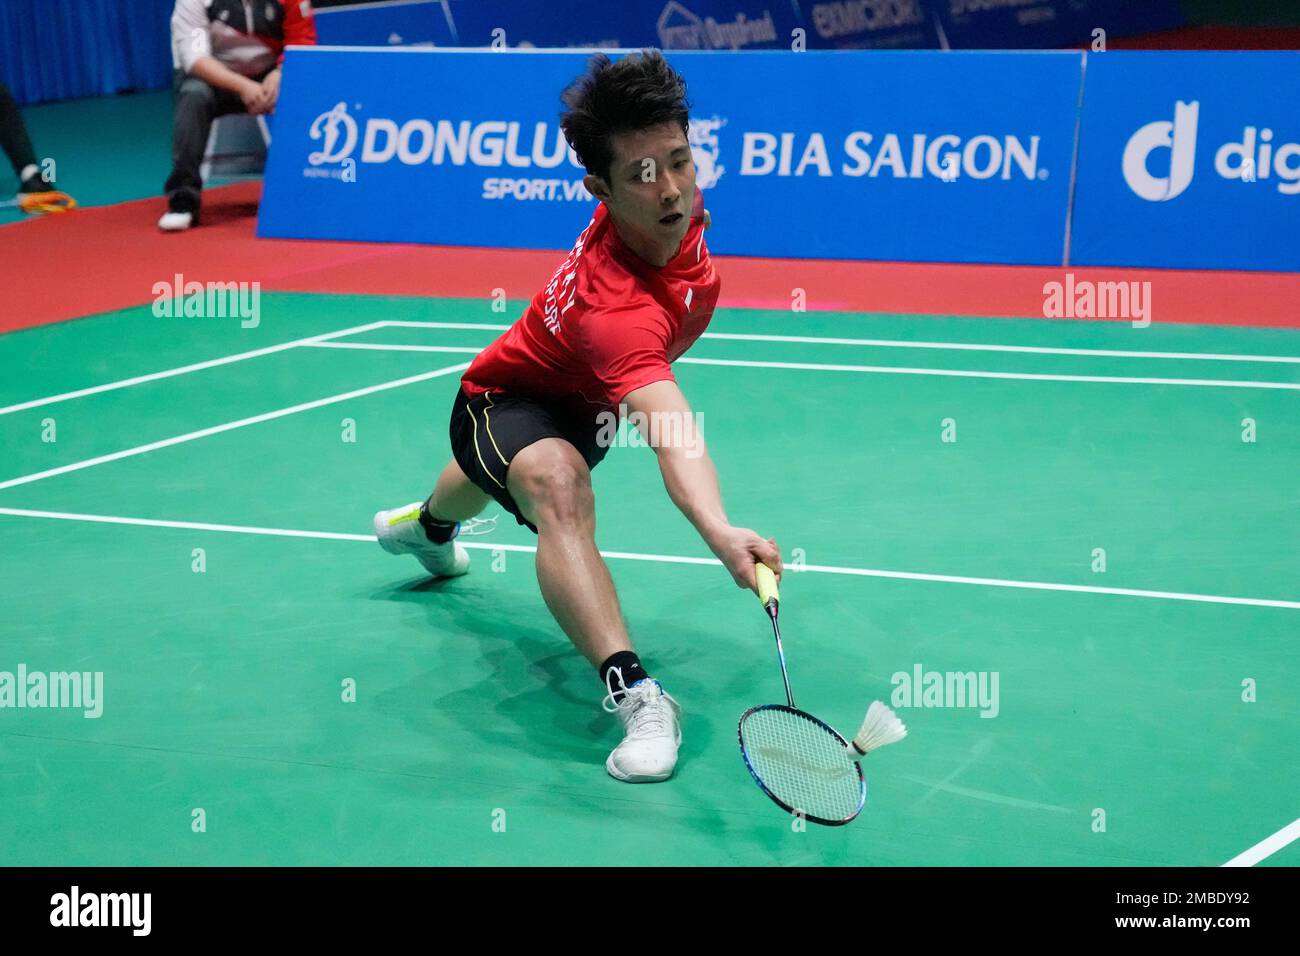 Singapores Loh Kean Yew competes against Thailands Kunlavut Vitidsarn during their mens singles badminton final match at the 31st Southeast Asian Games (SEA Games) in Bac Giang, Vietnam, Sunday, May 22, 2022